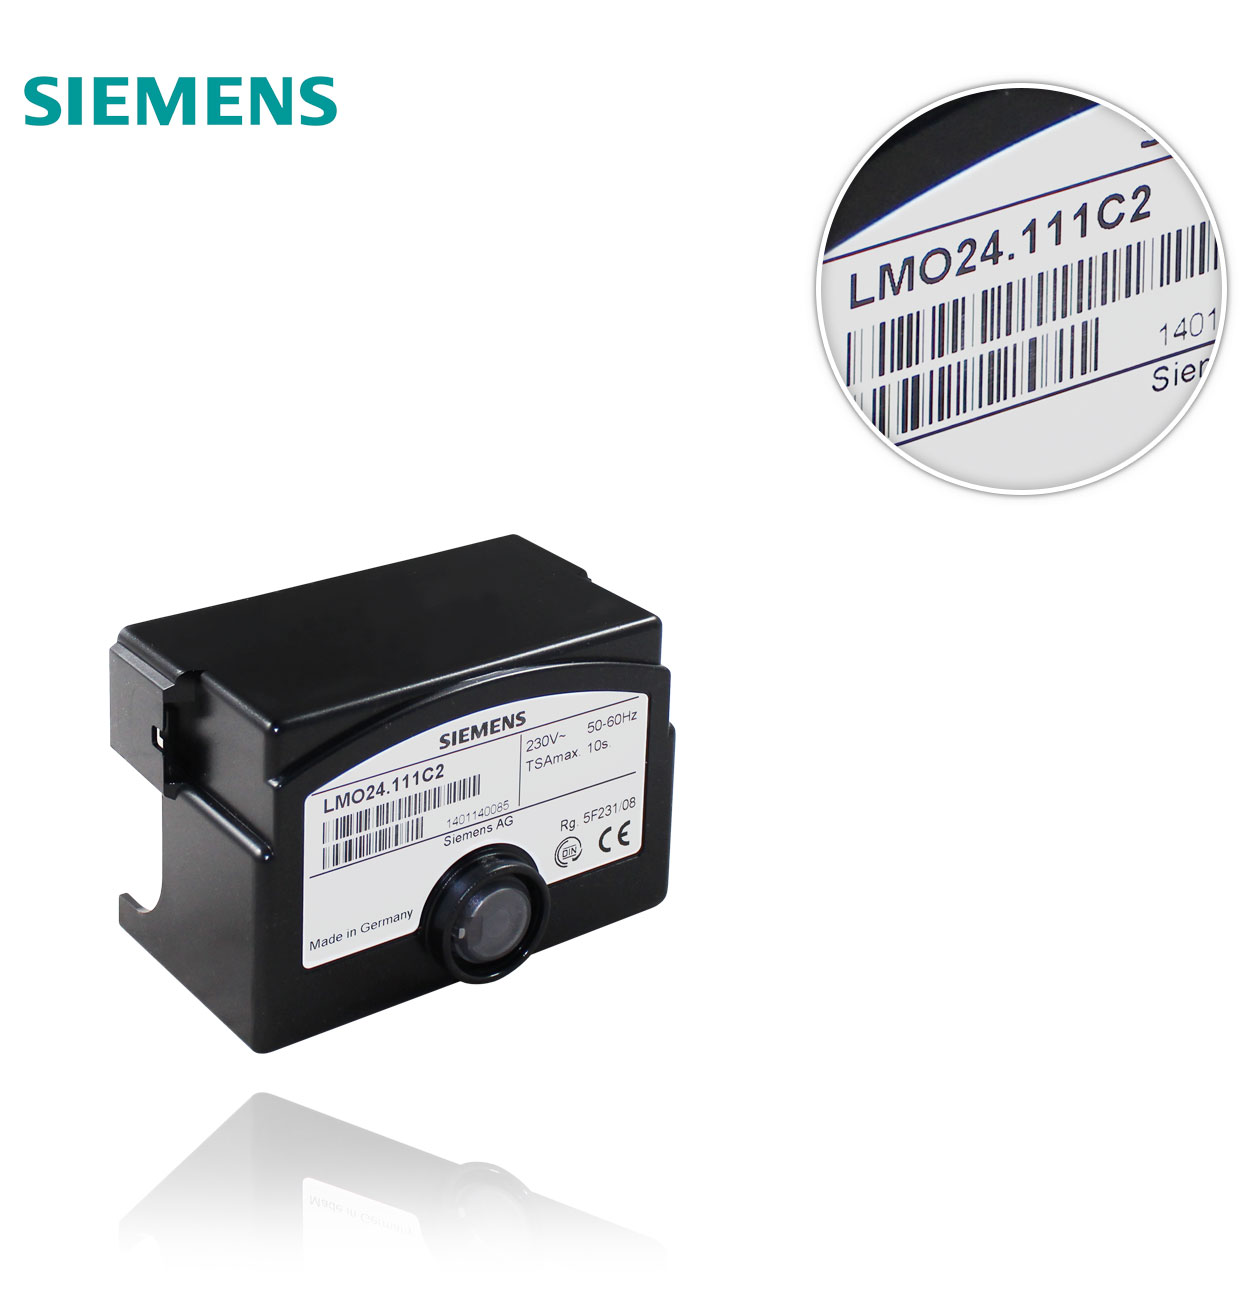 Siemens product collection